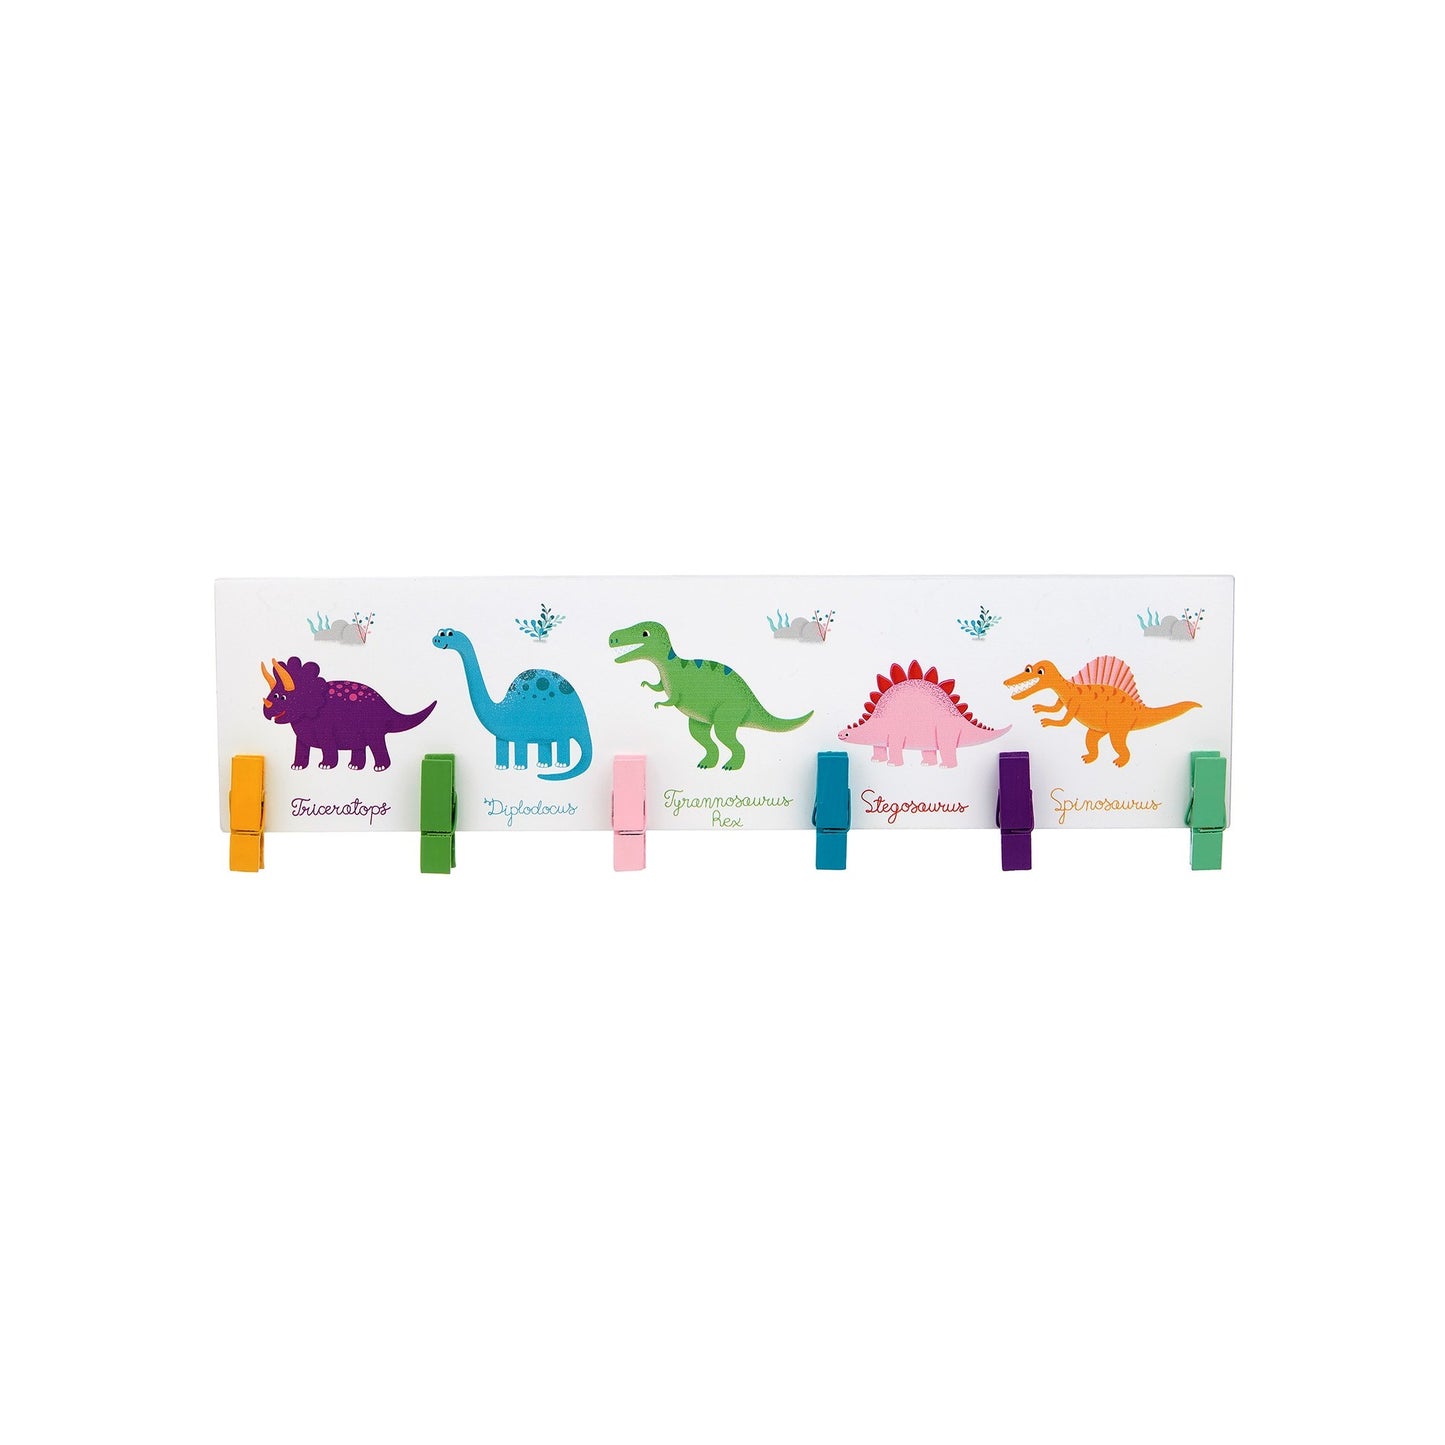 Dinosaur peg board with white background